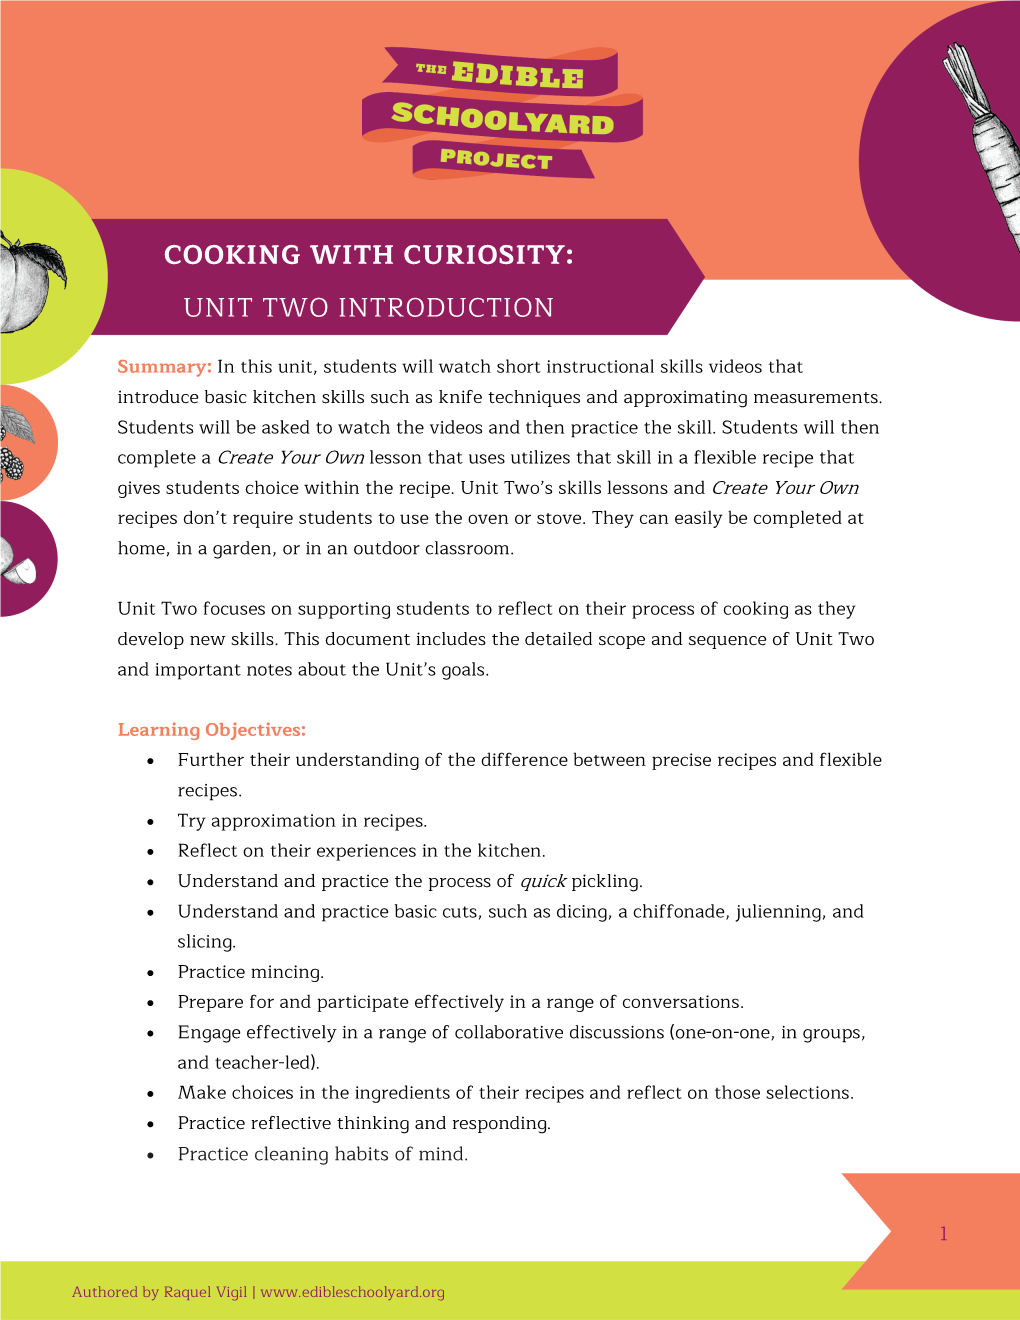 Cooking with Curiosity: Unit Two Introduction